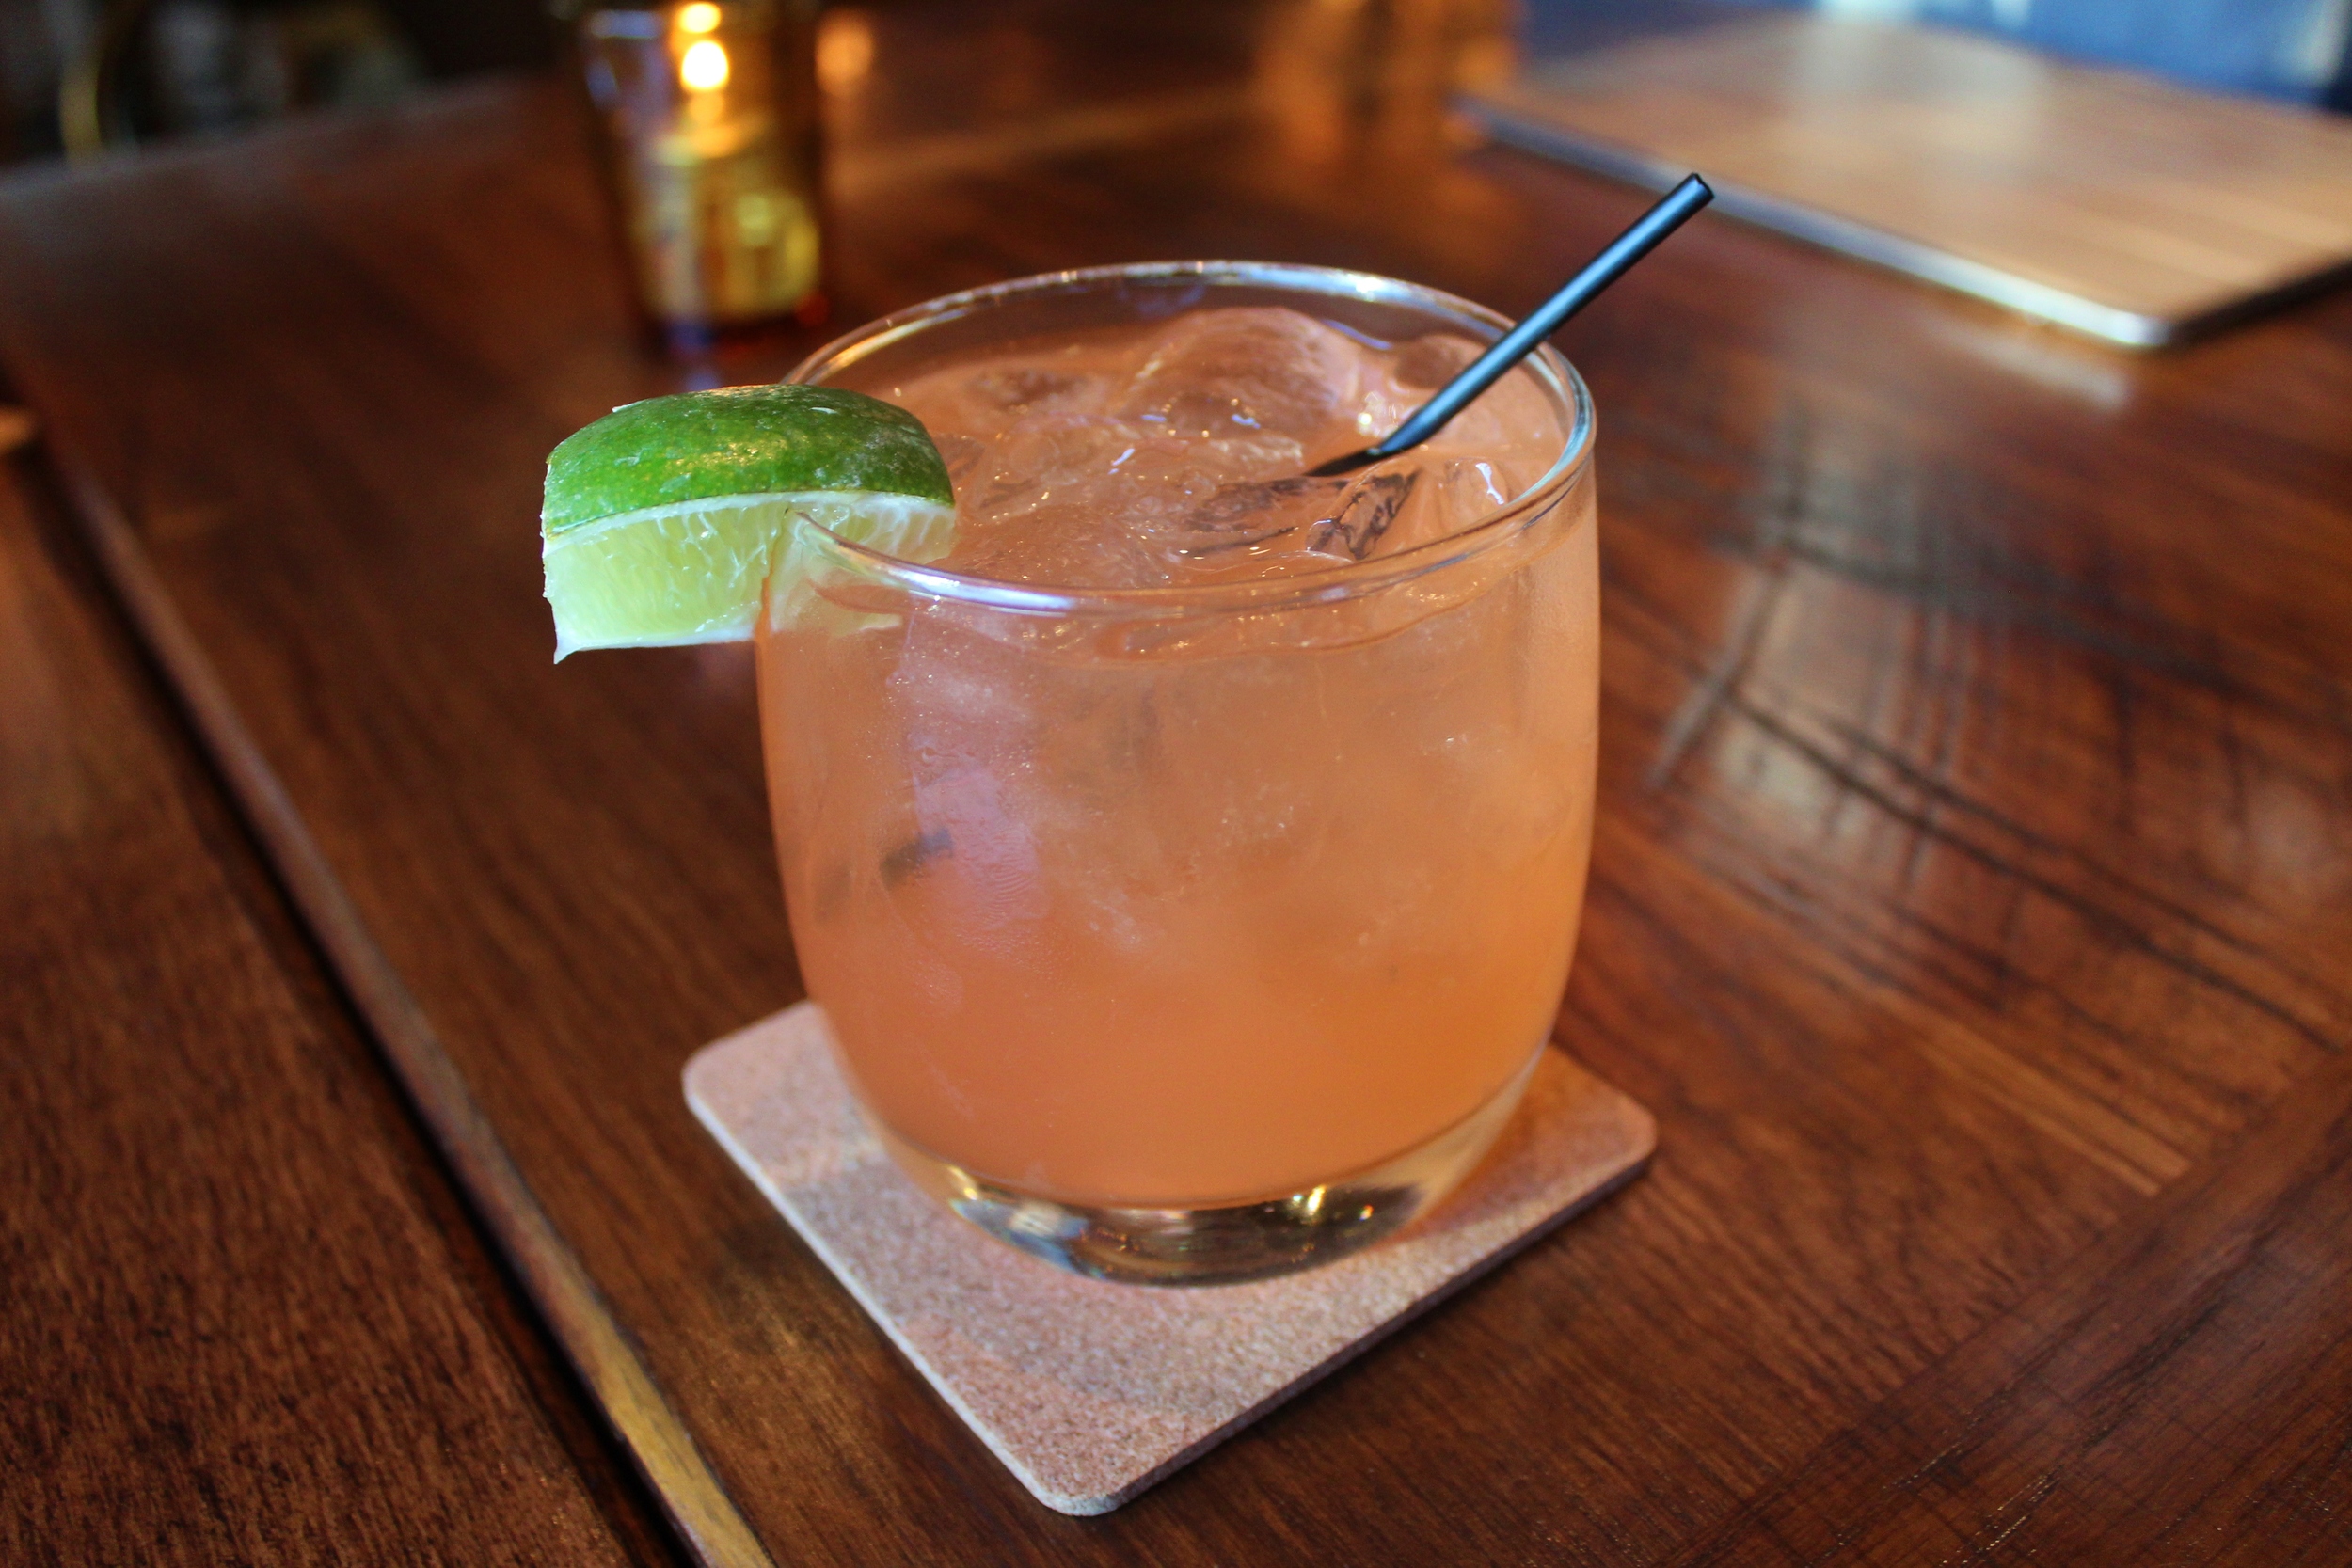 The Revival (Casamigos tequila, Aperol, grapefruit juice, and ginger beer)